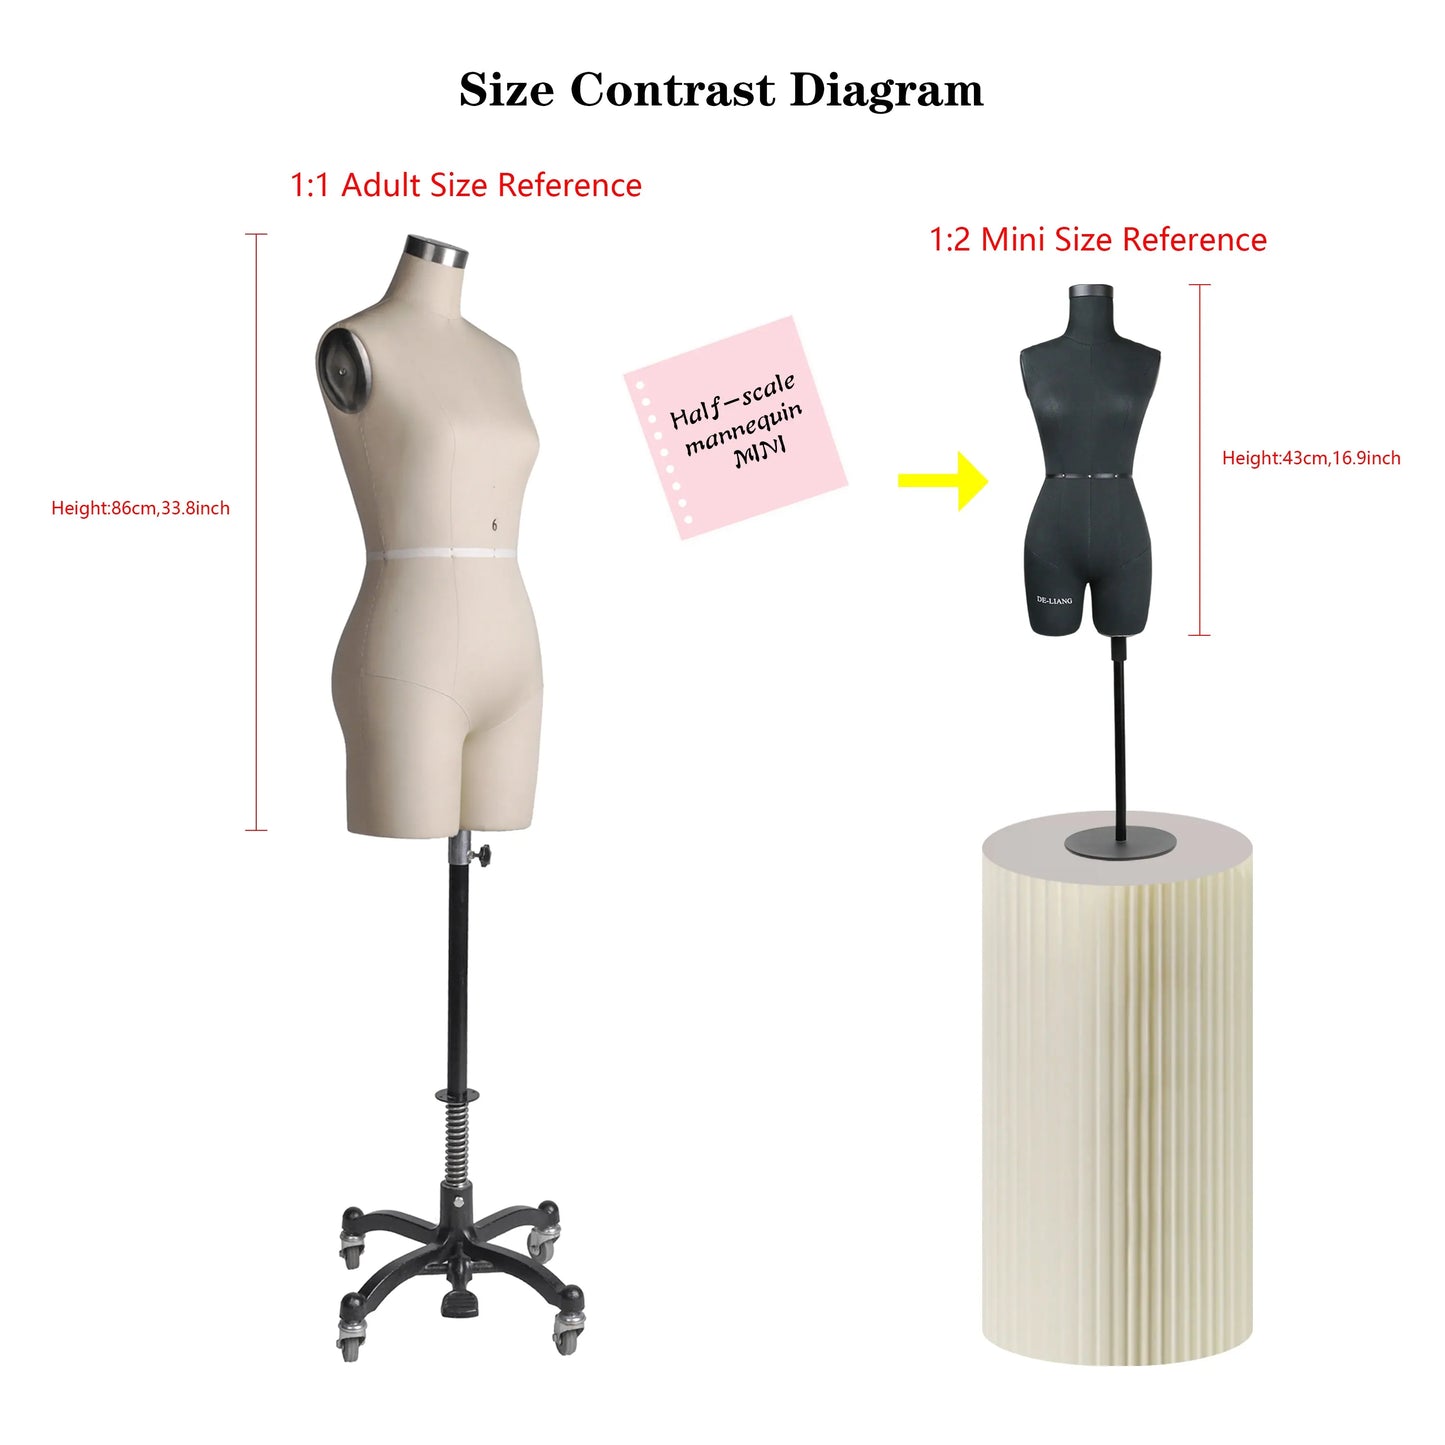 Black SIZE 6 Half Scale Dress Form for Sewing（Not Adult Size）1/2 Mini Fitting Mannequin 43cm Body Height, Female Torso Tailor Model